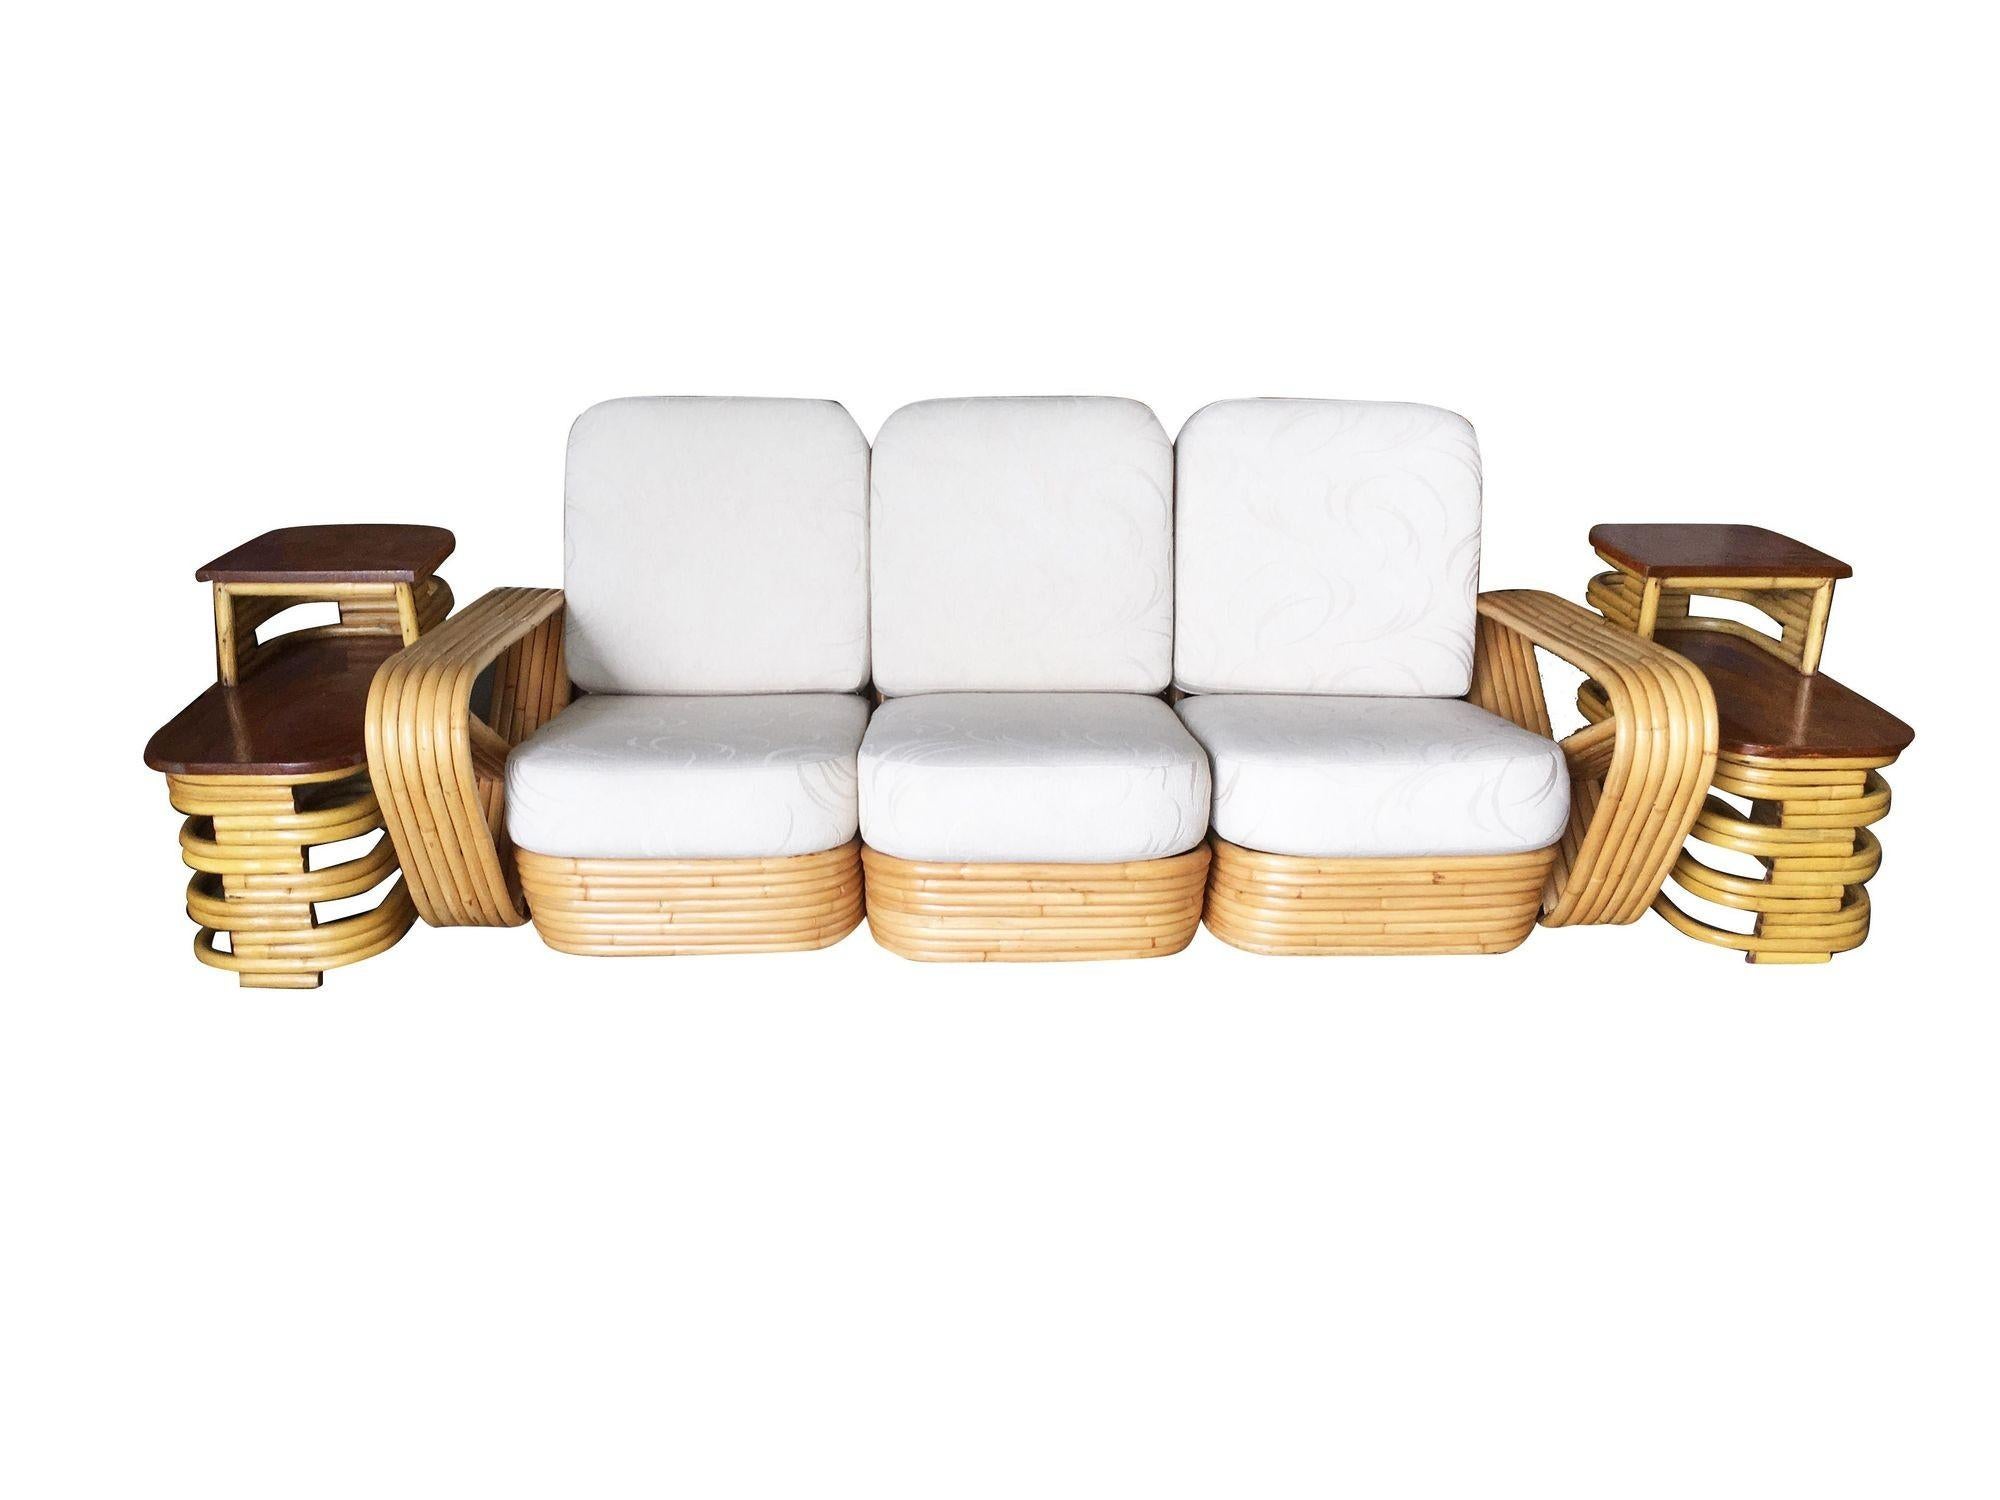  Restored Paul Frankl Six-Strand Sectional Sofa Living-Room Set with Side Tables For Sale 4